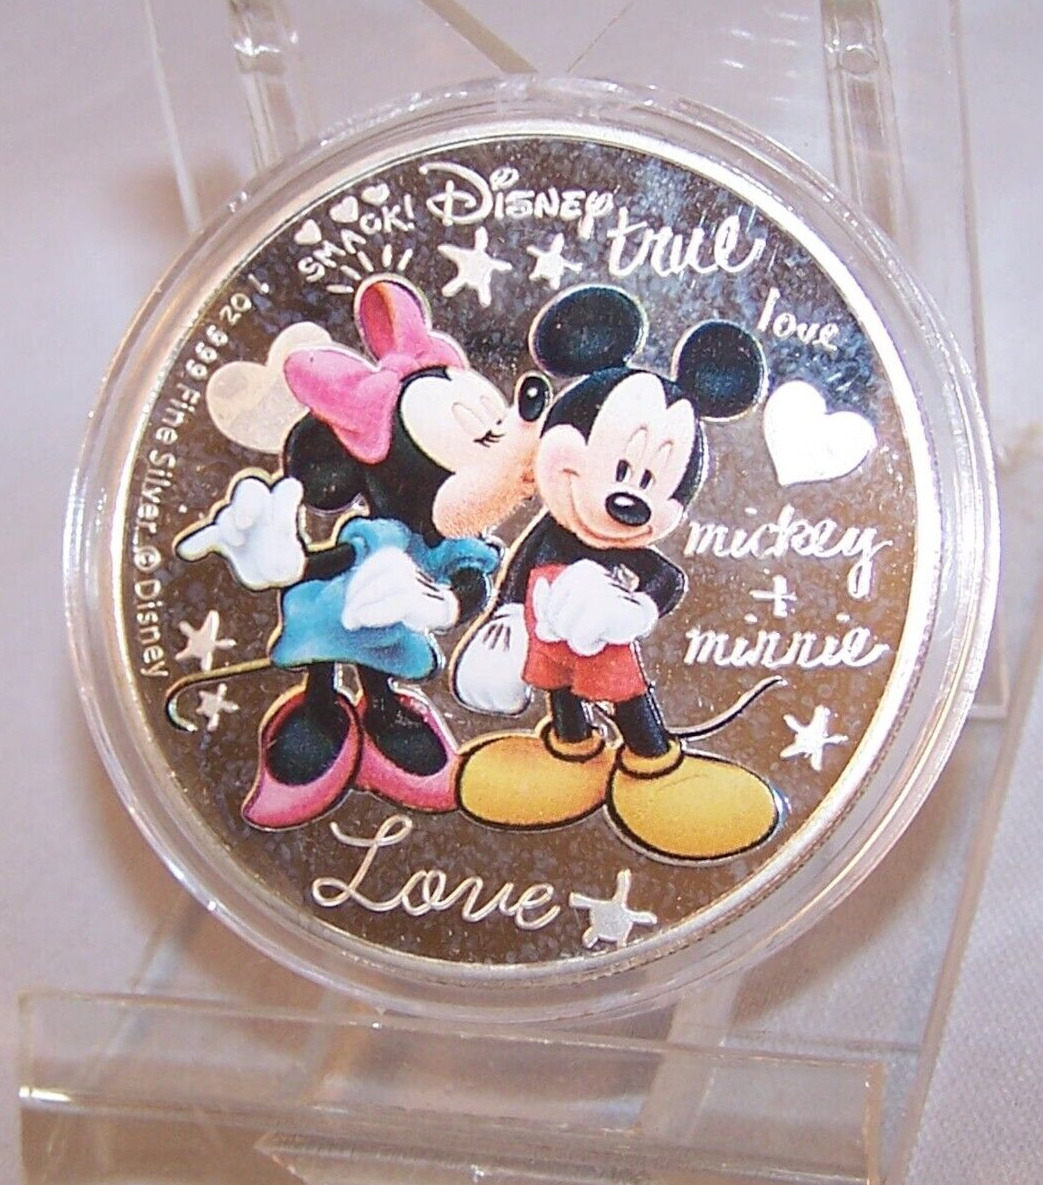 2015 Crazy in Love $2 Coin Micky & Minnie Mouse Disney 1oz Silver Uncirculated